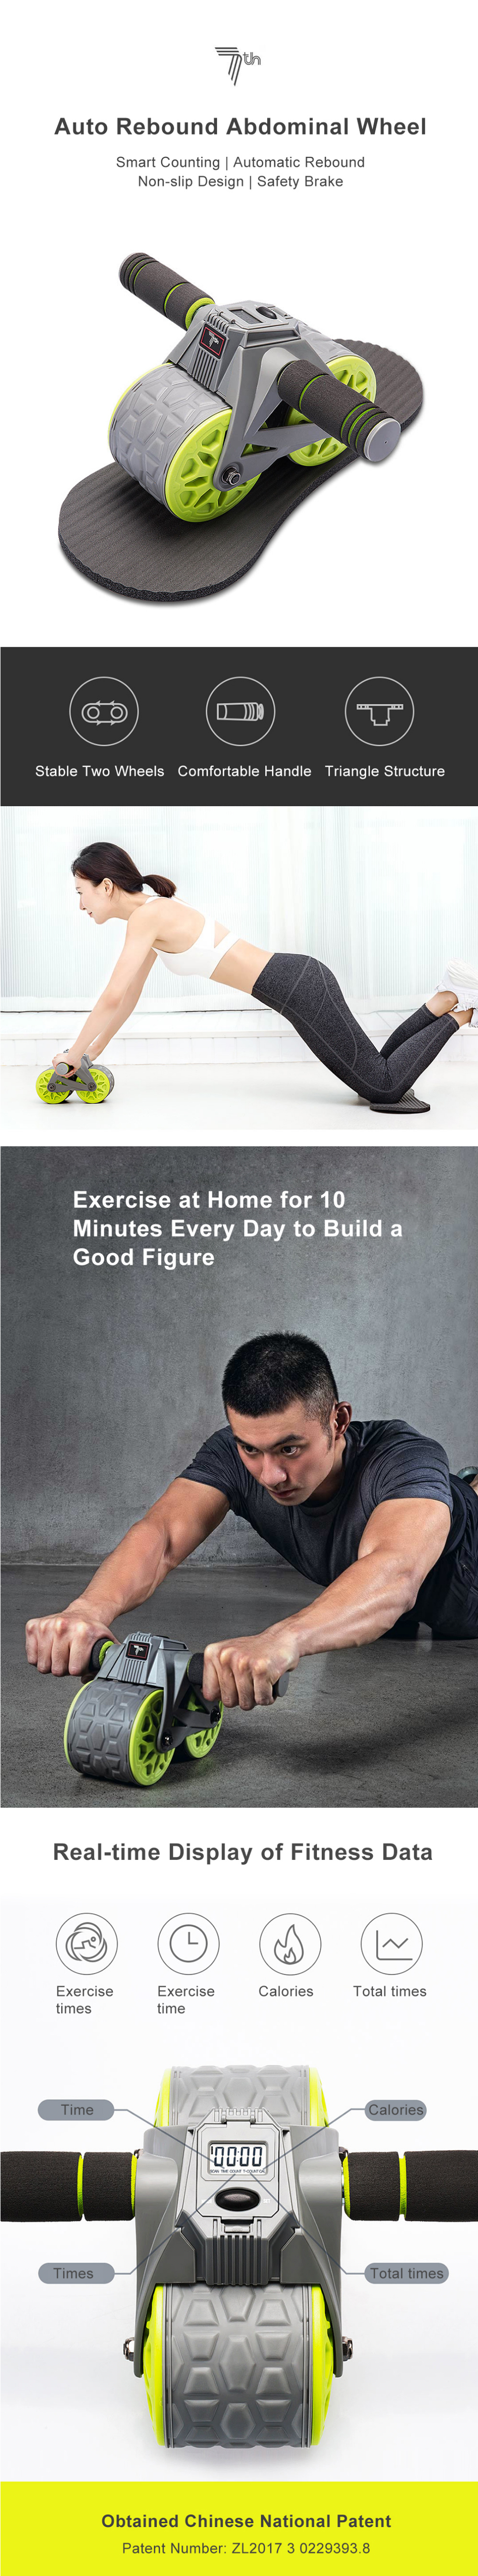 7th-Smart-Counting-Automatic-Rebound-Abdominal-Wheel-Home-Gym-Fitness-Equipment-No-Noise-Abdominal-M-1733919-1